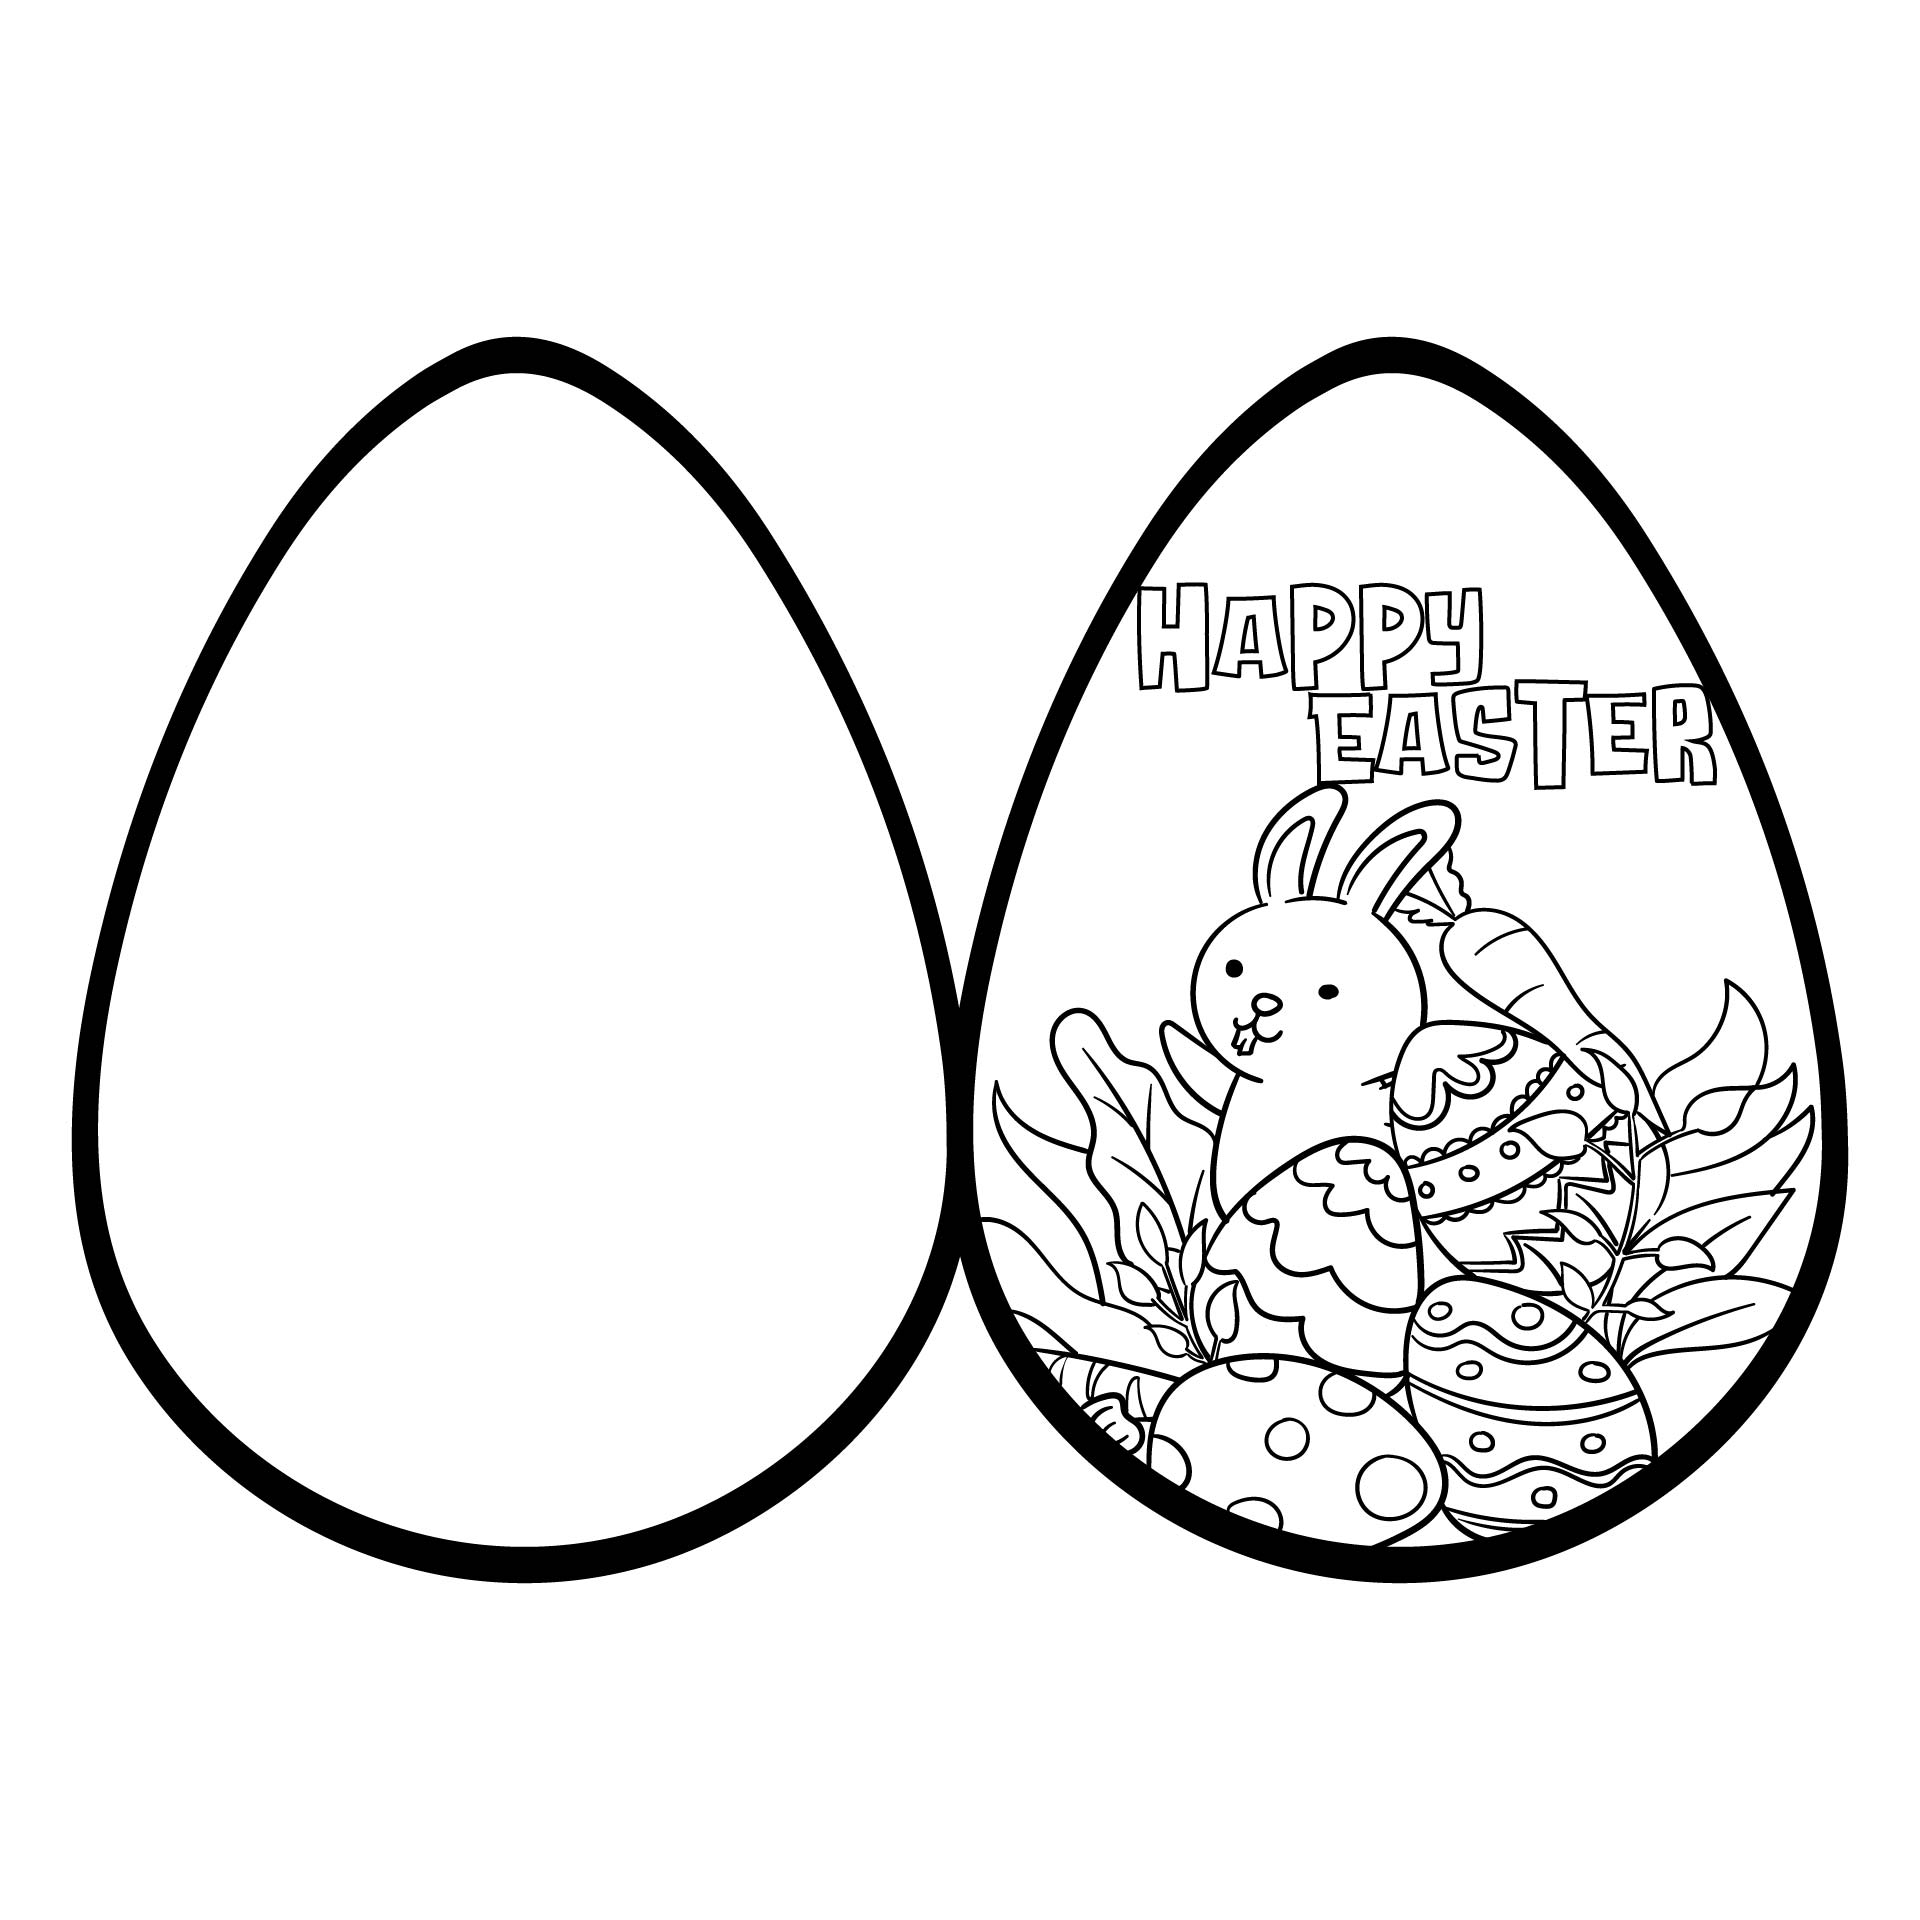 Printable Happy Easter Cards For Coloring